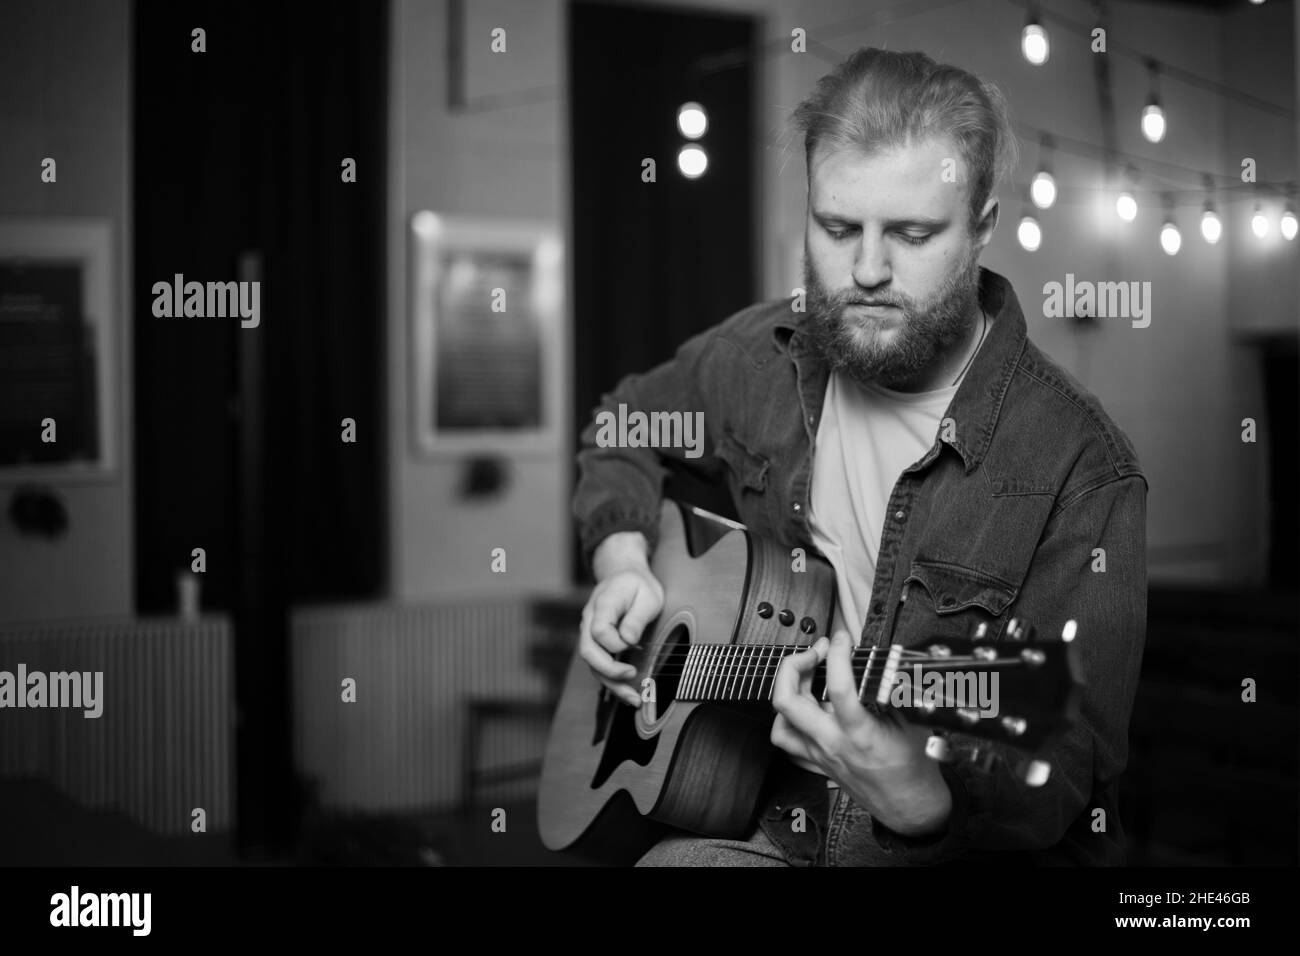 A young guy with a beard plays an acoustic guitar in a room with warm lighting Stock Photo